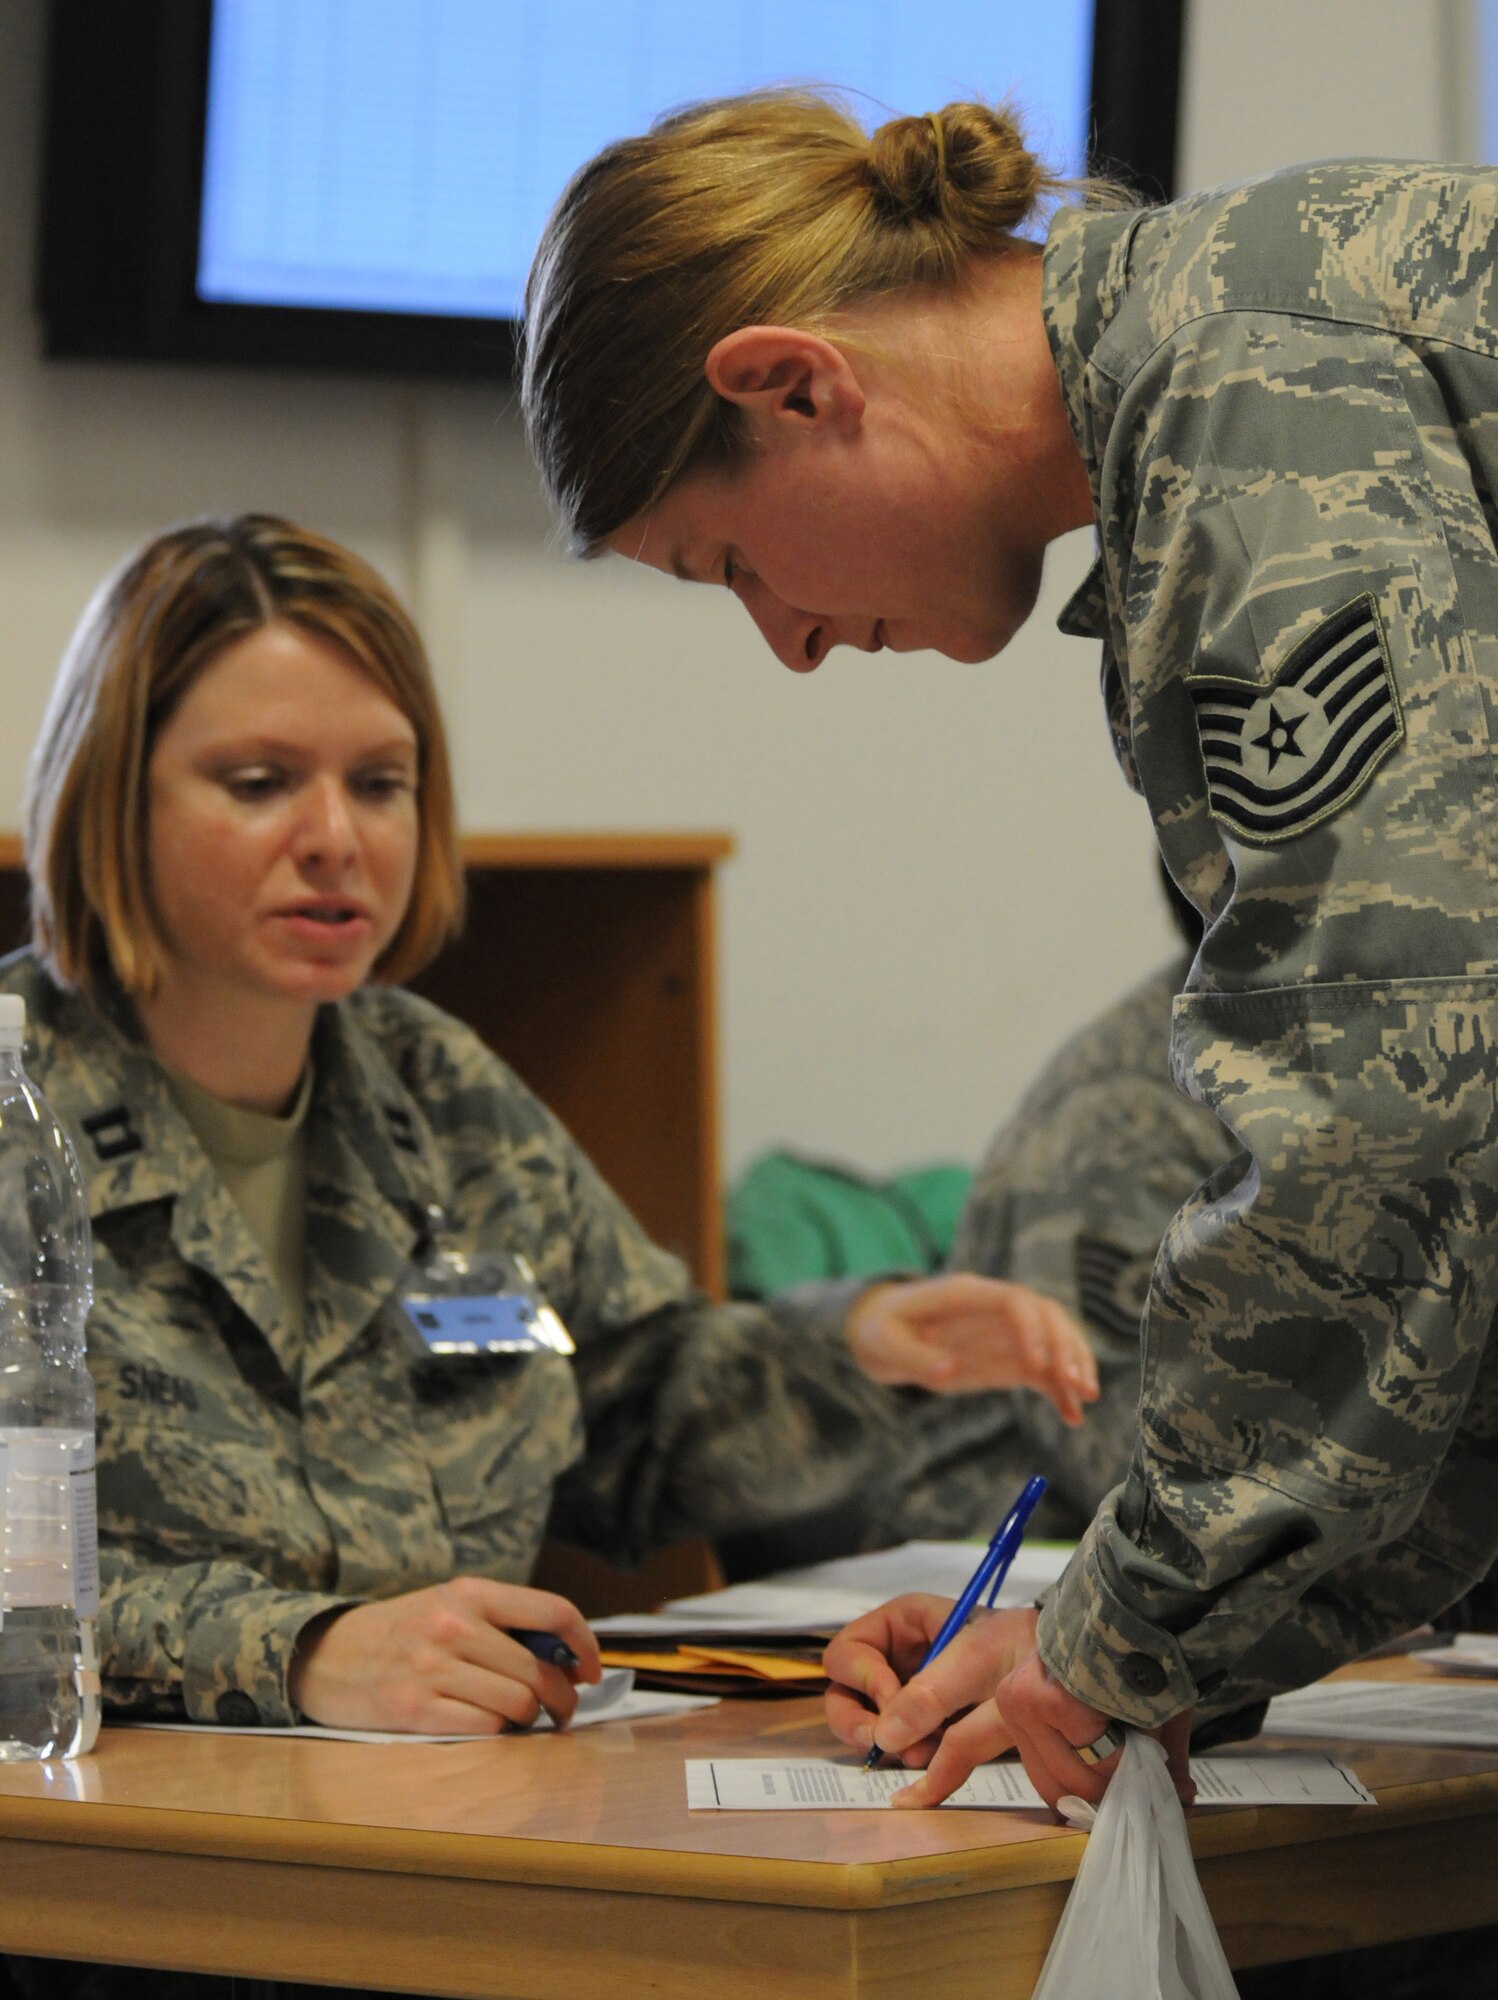 SPANGDAHLEM AIR BASE, Germany – A 52nd Component Maintenance Squadron tech. sgt. signs paperwork as she processes through the personnel deployment function line here before leaving in support of Operation Odyssey Dawn March 20. Joint Task Force Odyssey Dawn is the U.S. Africa Command task force established to provide operational and tactical command and control of U.S. military forces supporting the international response to the unrest in Libya and enforcement of United Nations Security Council Resolution (UNSCR) 1973. UNSCR 1973 authorizes all necessary measures to protect civilians in Libya under threat of attack by Qadhafi regime forces.  JTF Odyssey Dawn is commanded by U.S. Navy Admiral Samuel J. Locklear, III. (U.S. Air Force photo/Staff Sgt. Benjamin Wilson)